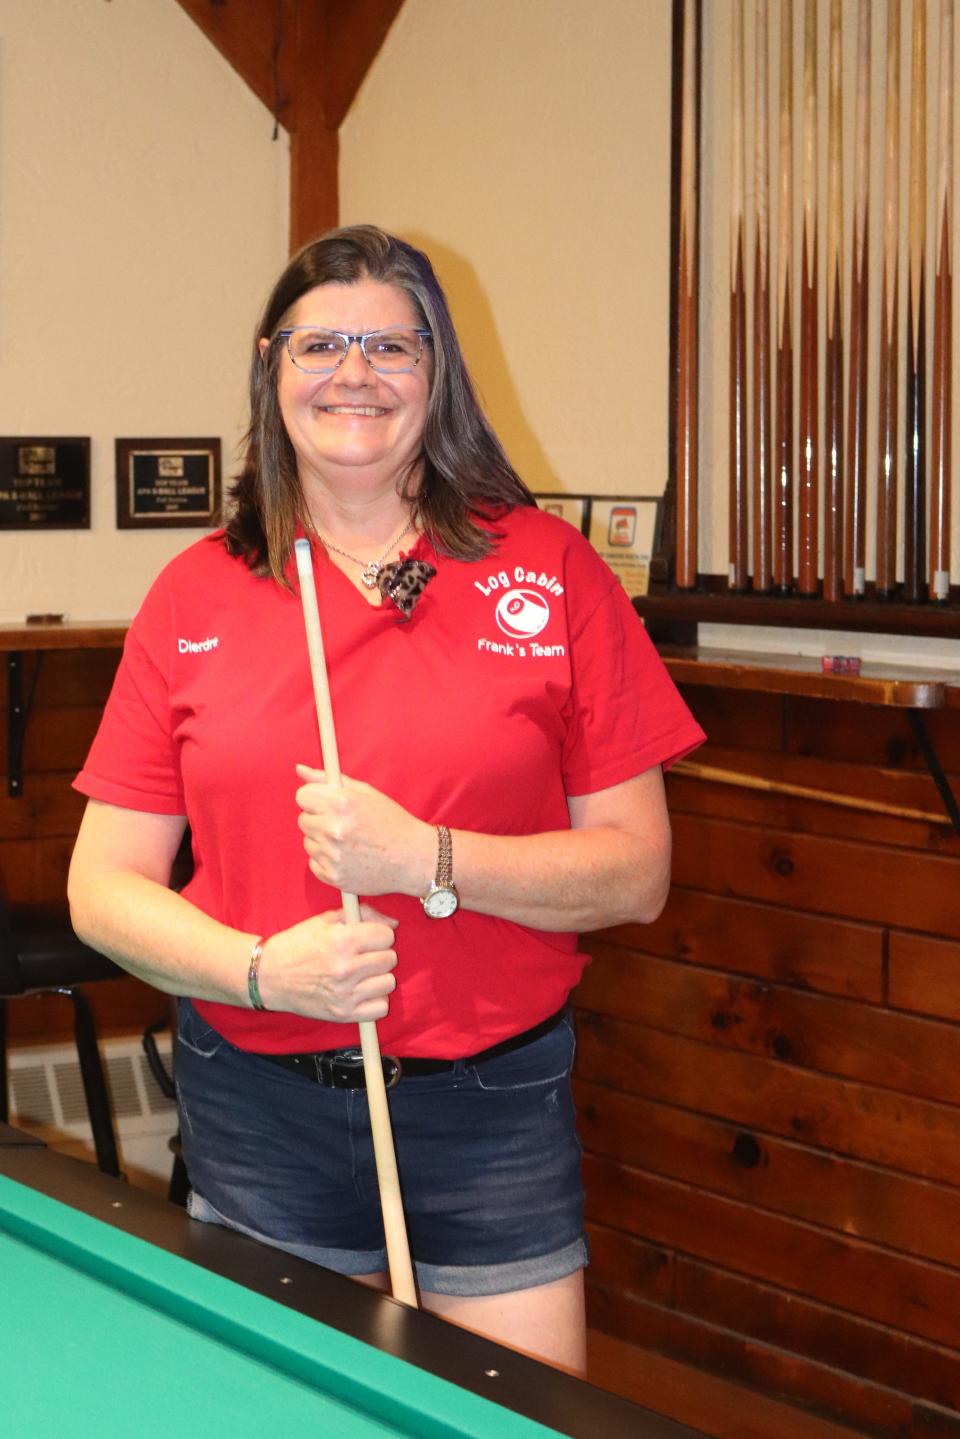 Dierdre Clonan is part of a seven person team participating in the 2023 American Pool Players Association 9-Ball World Championships in Las Vegas.